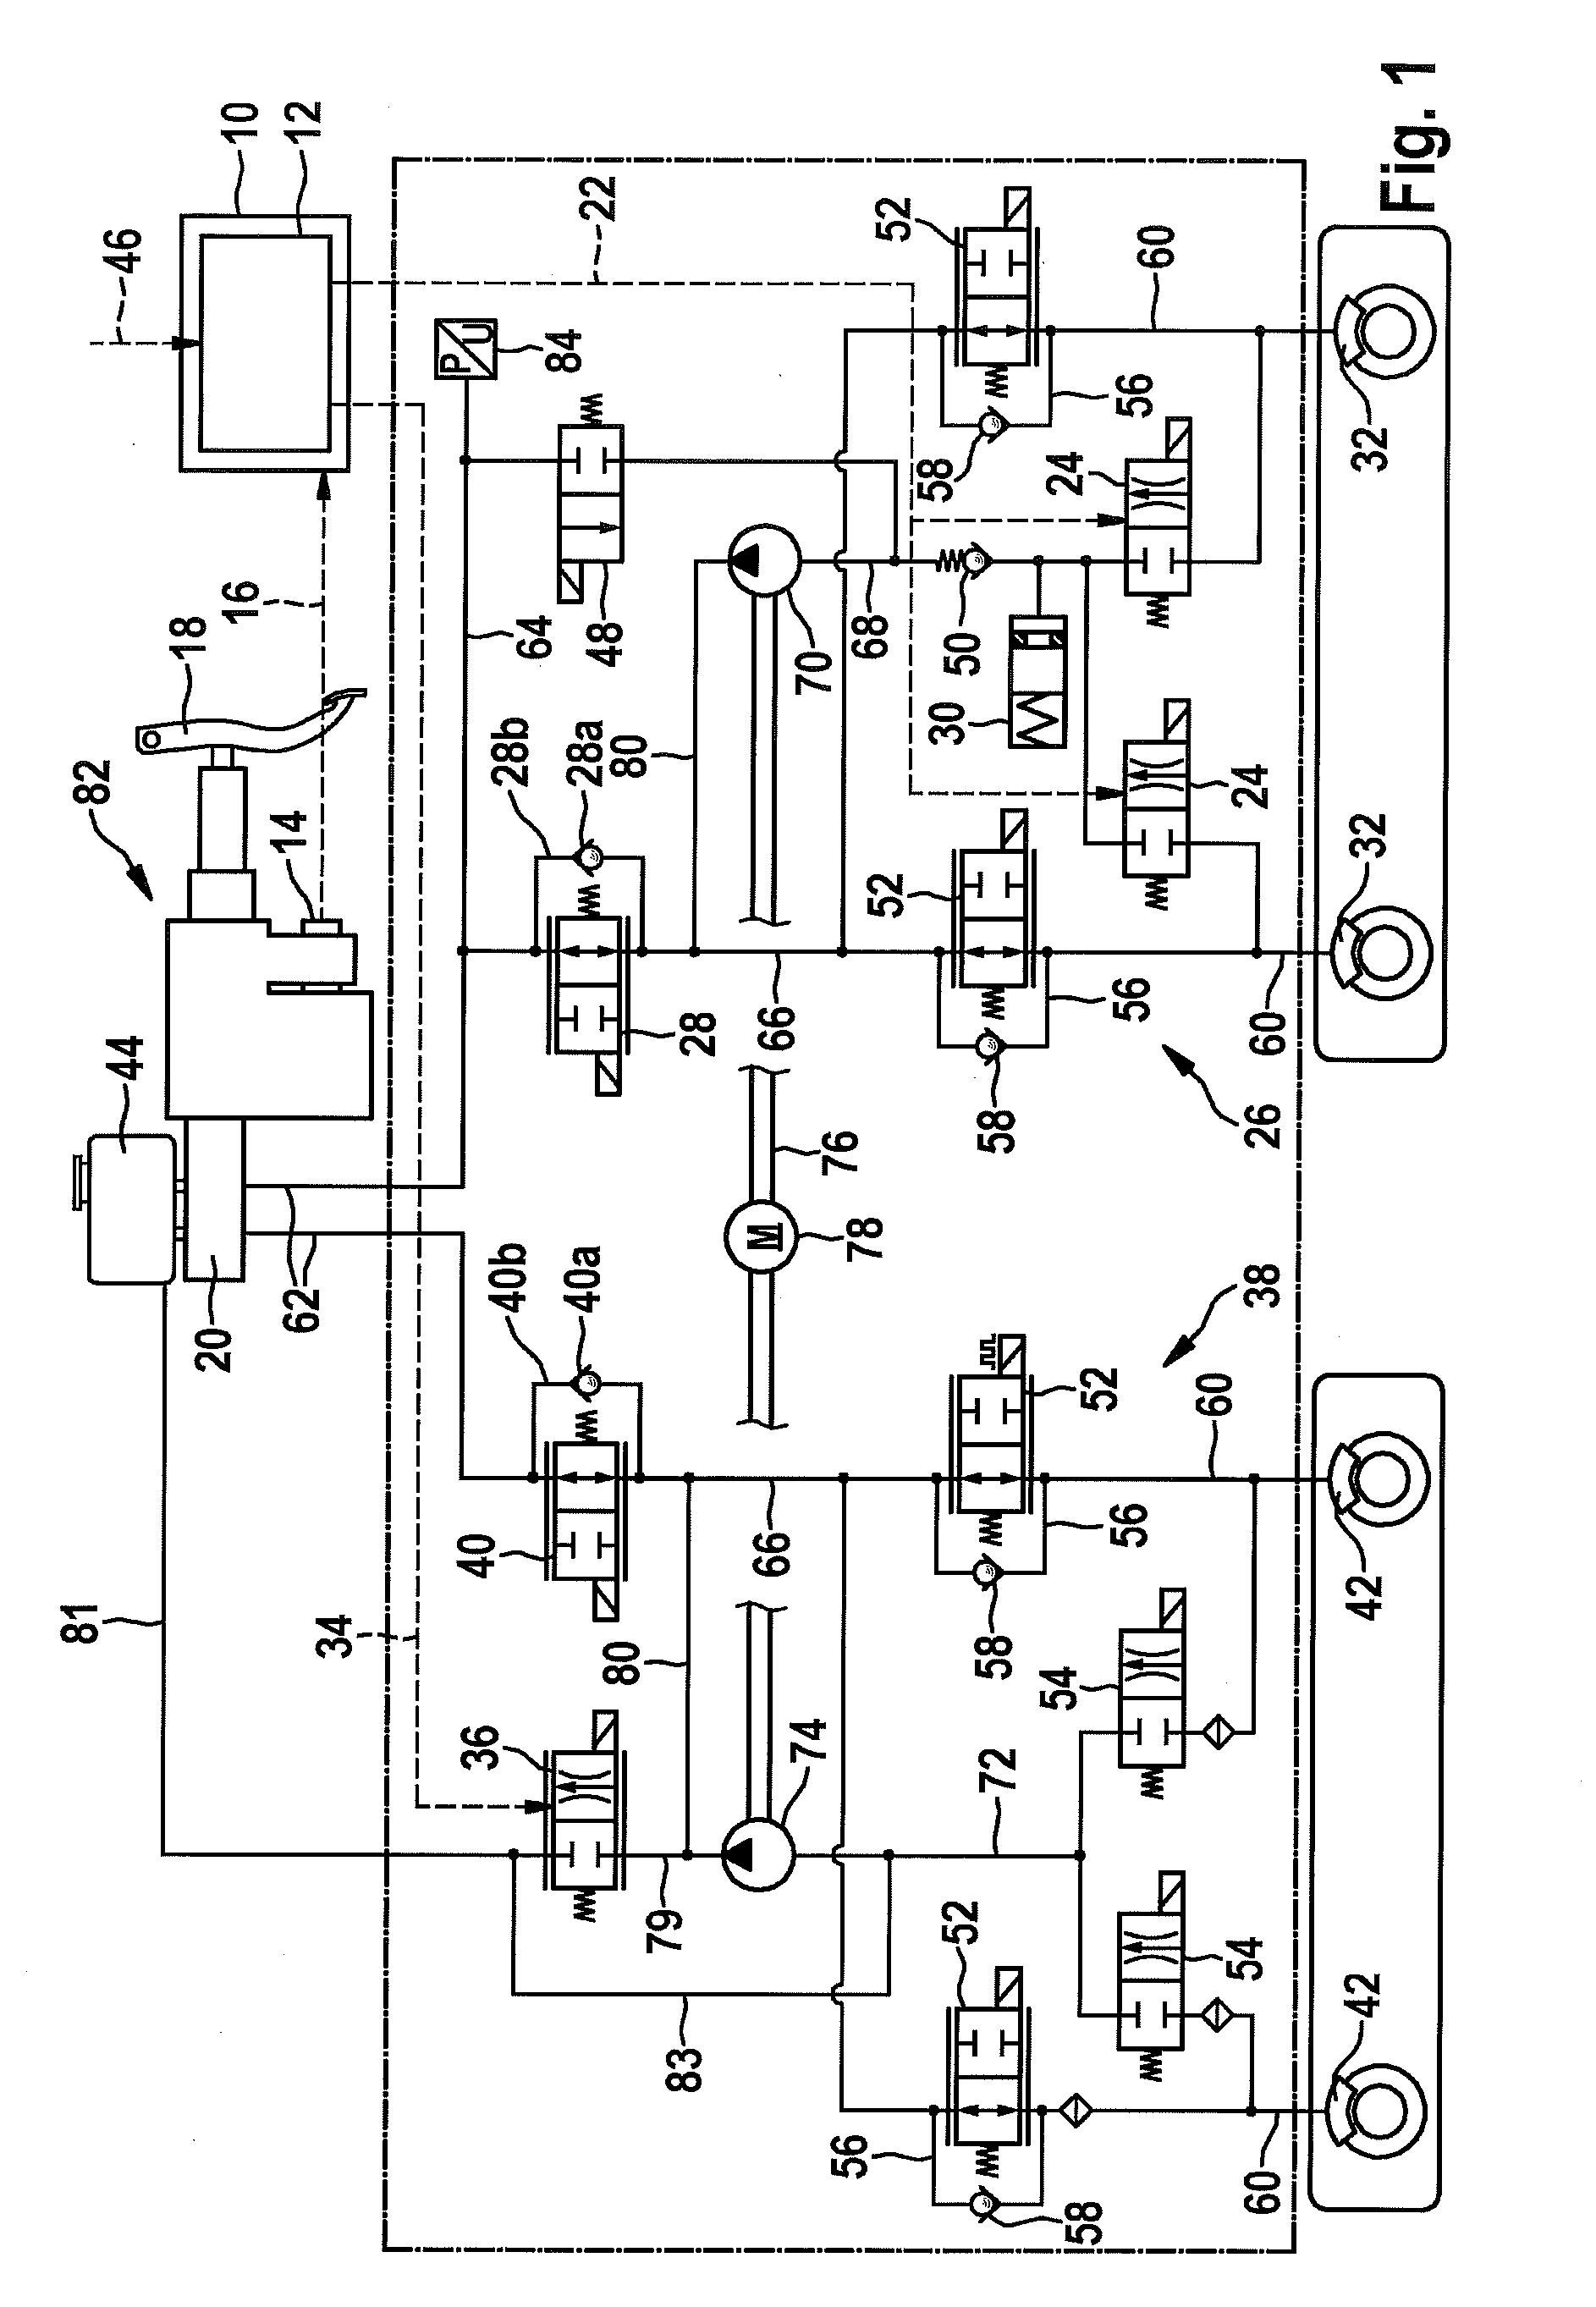 Control device for a hydraulic braking system of a vehicle, hydraulic braking system for a vehicle, and method for operating a hydraulic braking system of a vehicle